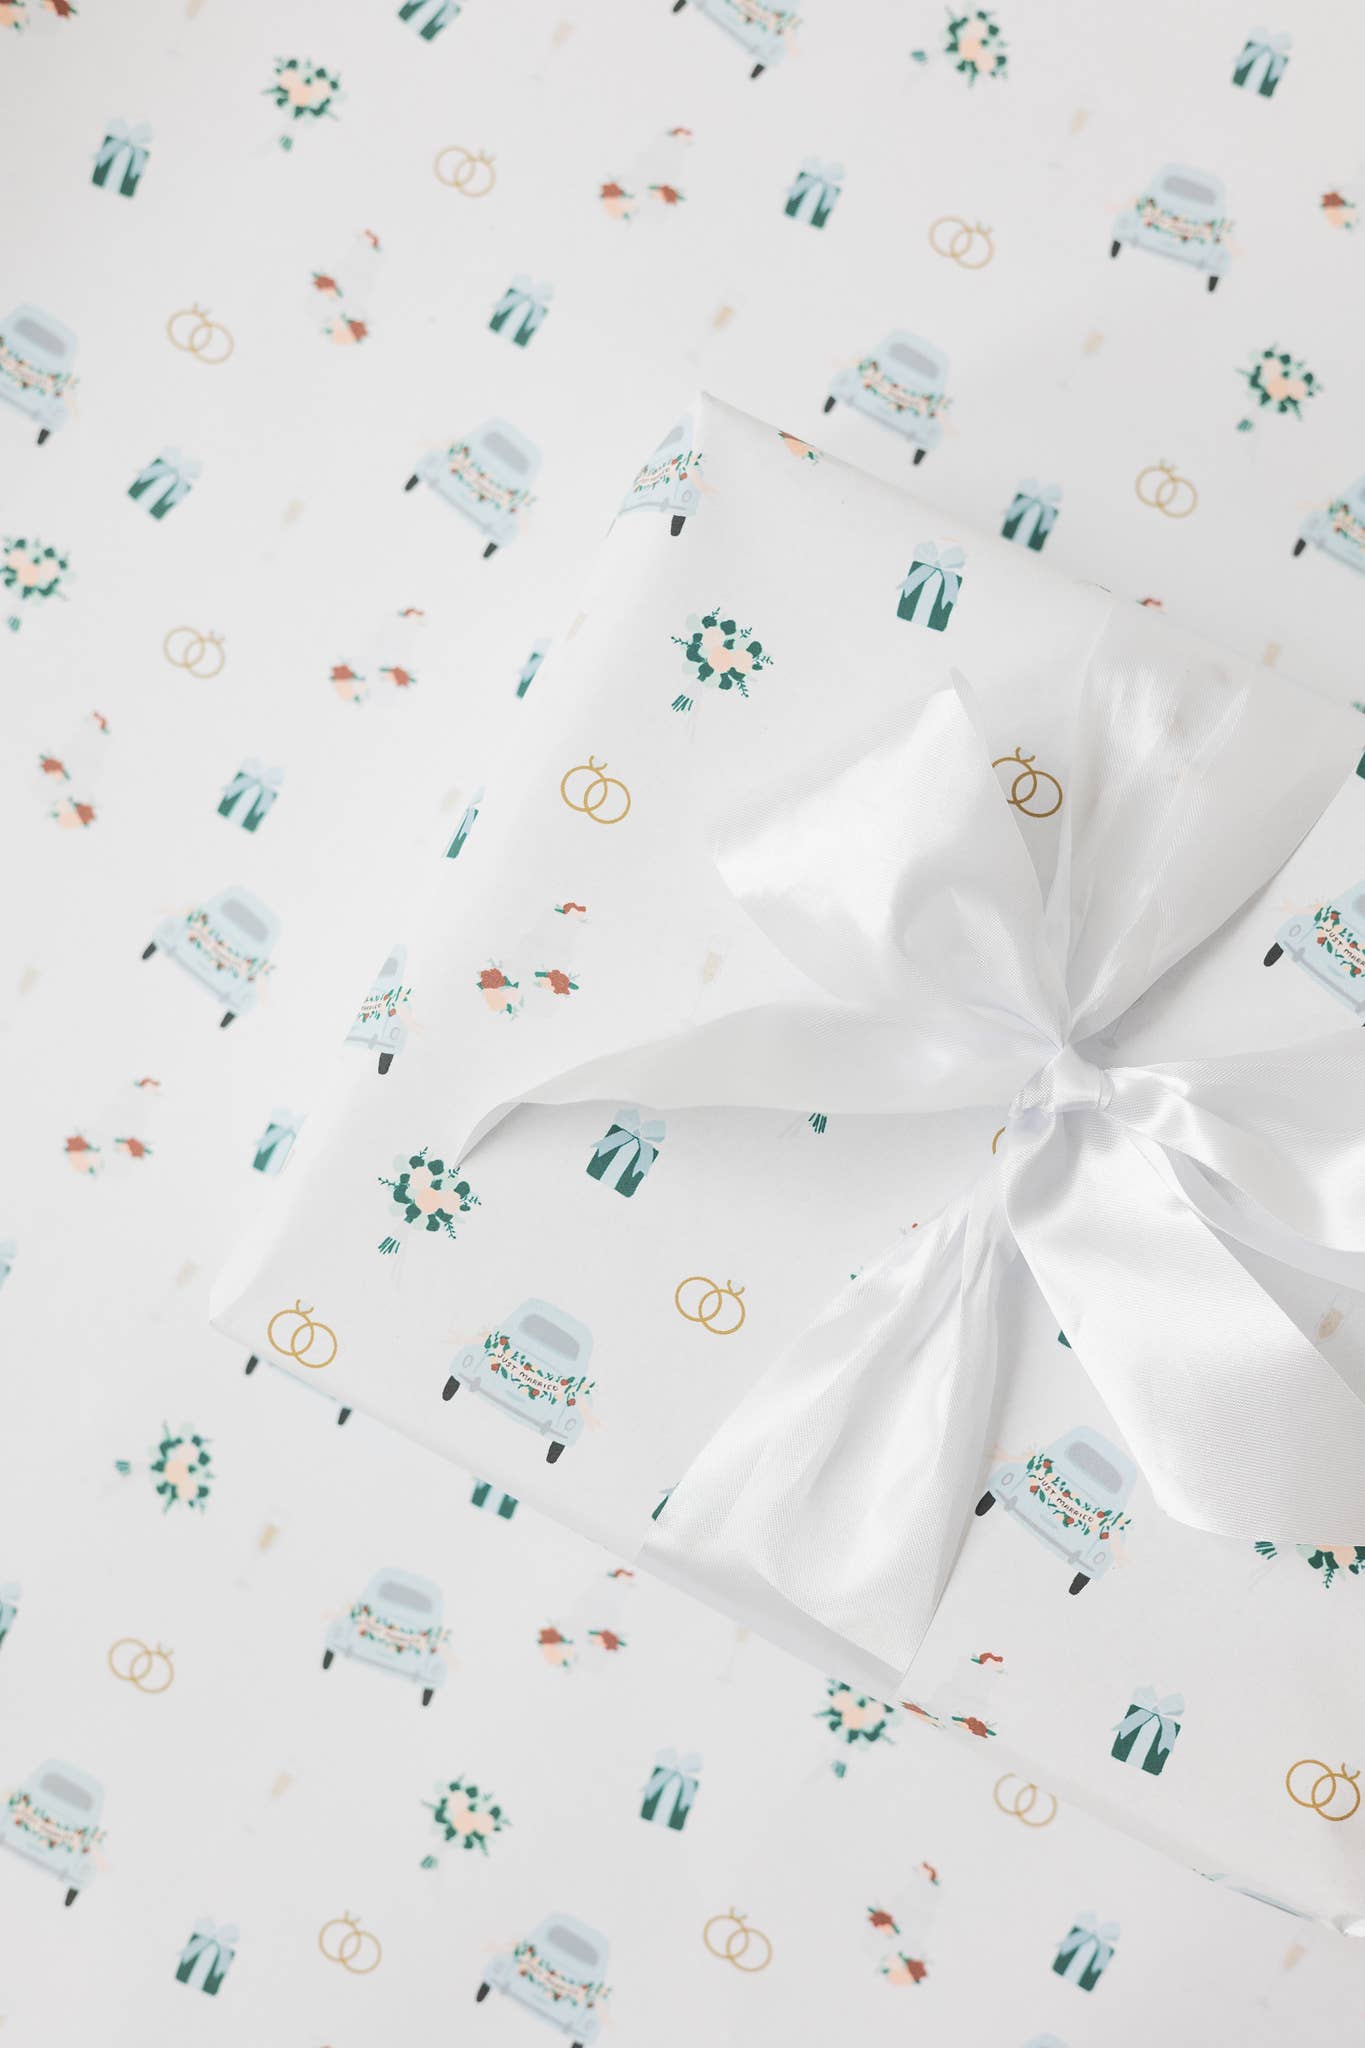 Wrapping Paper Roll - Wedding Pattern